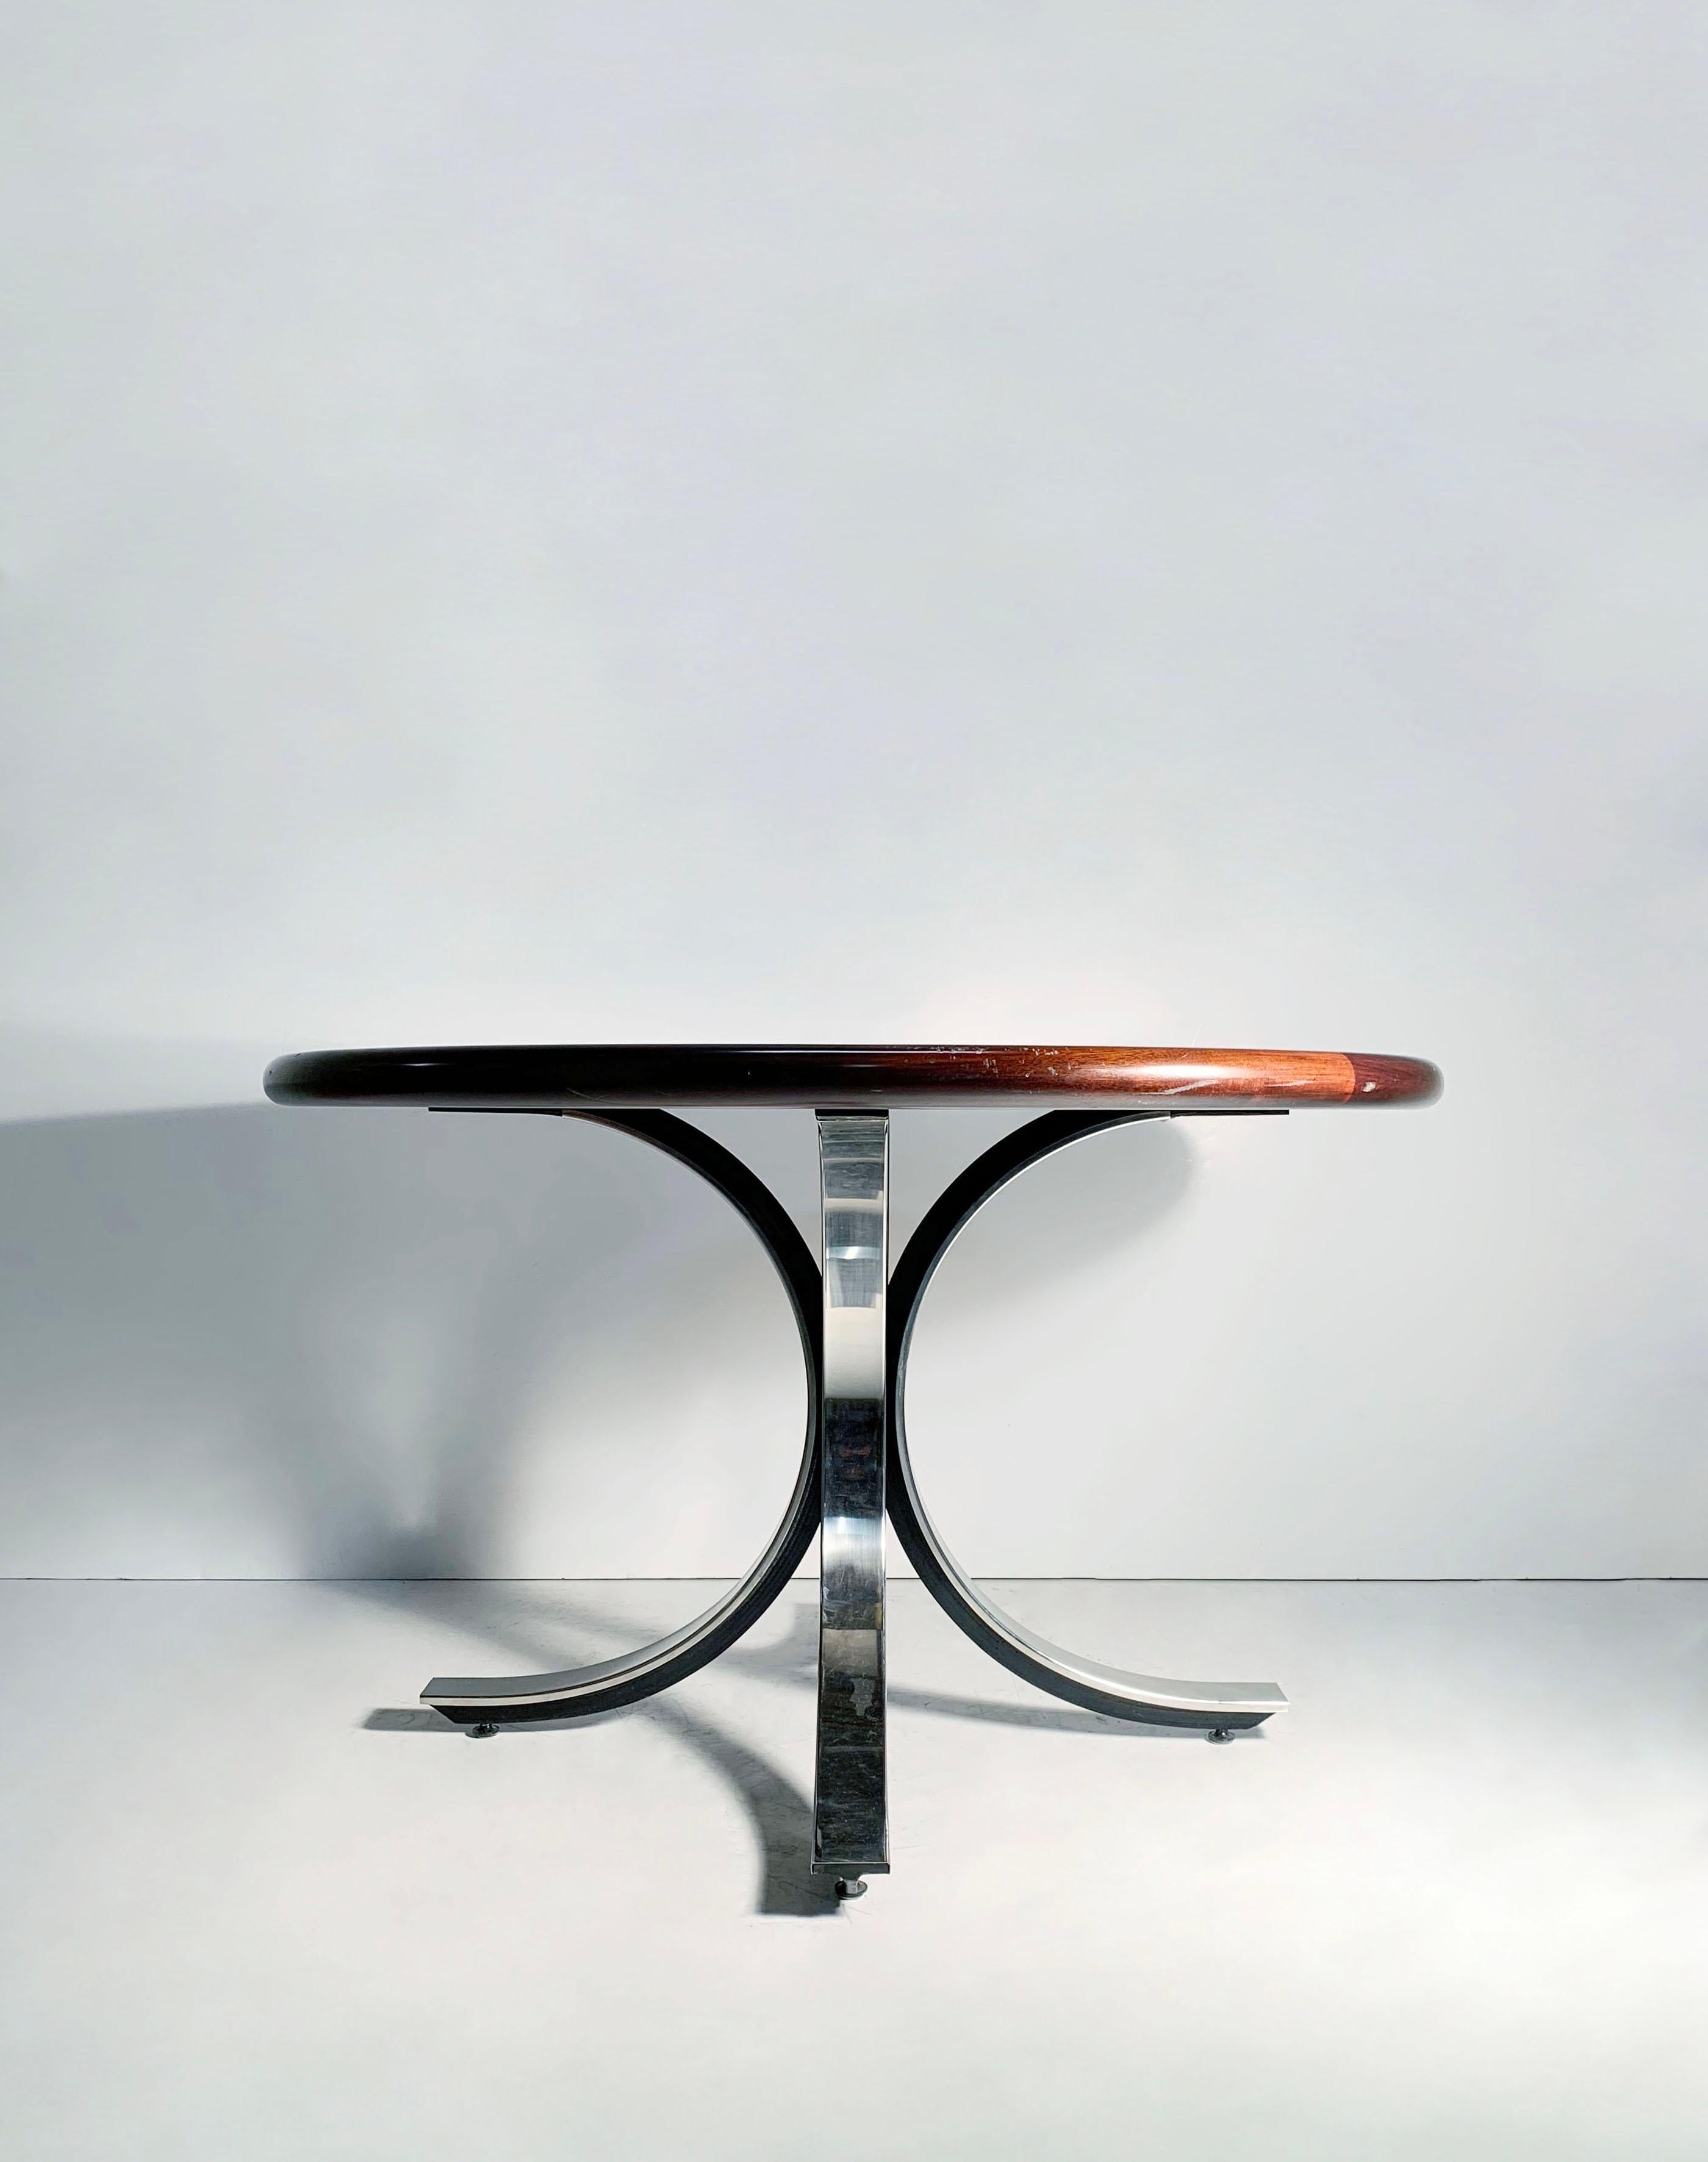 Beautiful high end table produced in the 1970s/1980s attributed to Osvaldo Borsani. The top is easily interchangeable with another top in the event a marble top is desirable. This original top is quite beautiful. Not exactly sure off the type of